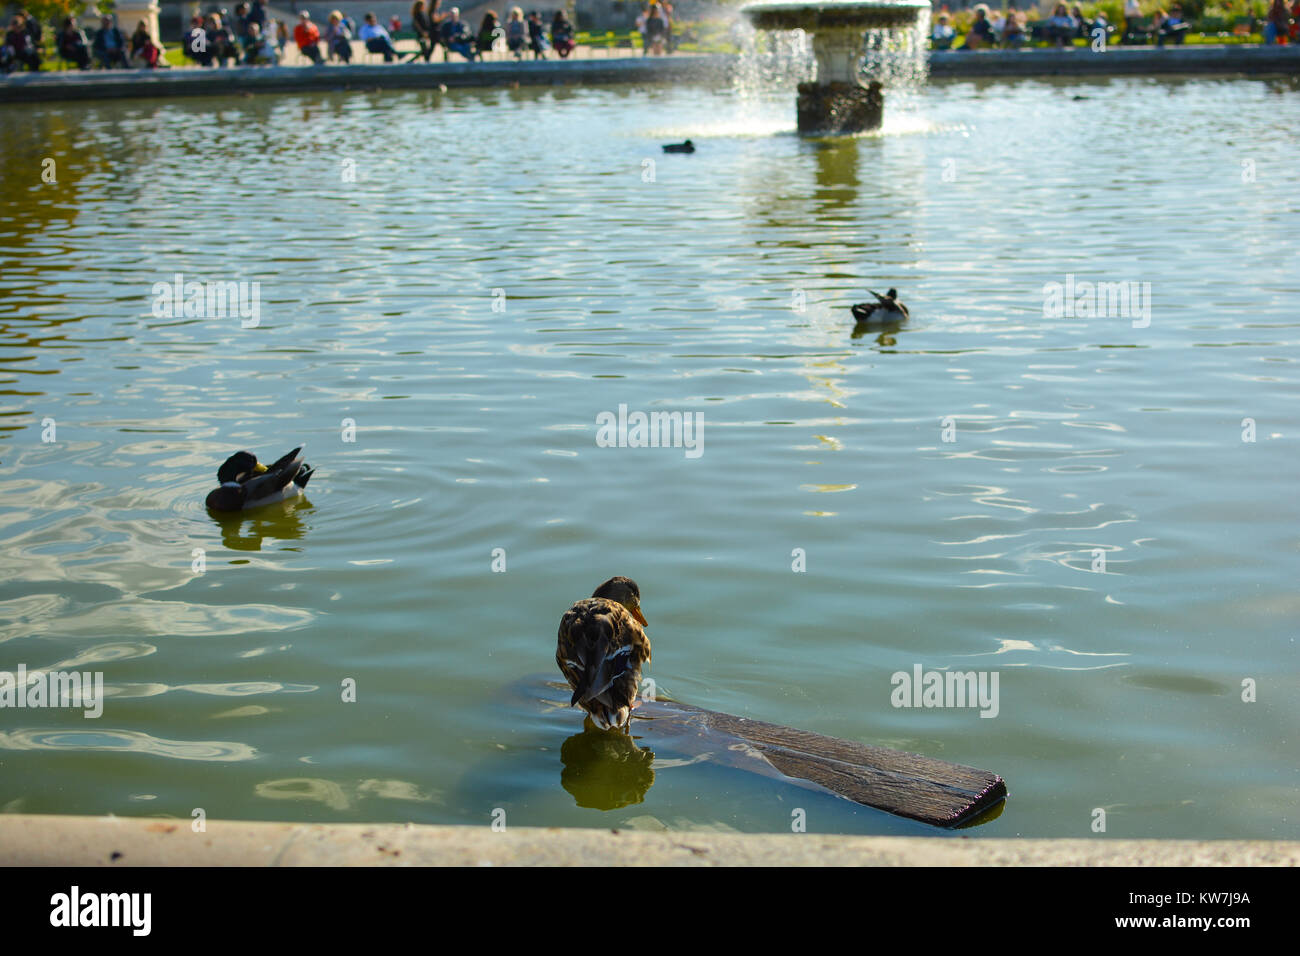 Ducks swim and balance on a wooden board in the Grand Bassin Rond in the Jardin de Tuileries as tourists relax in Paris France Stock Photo